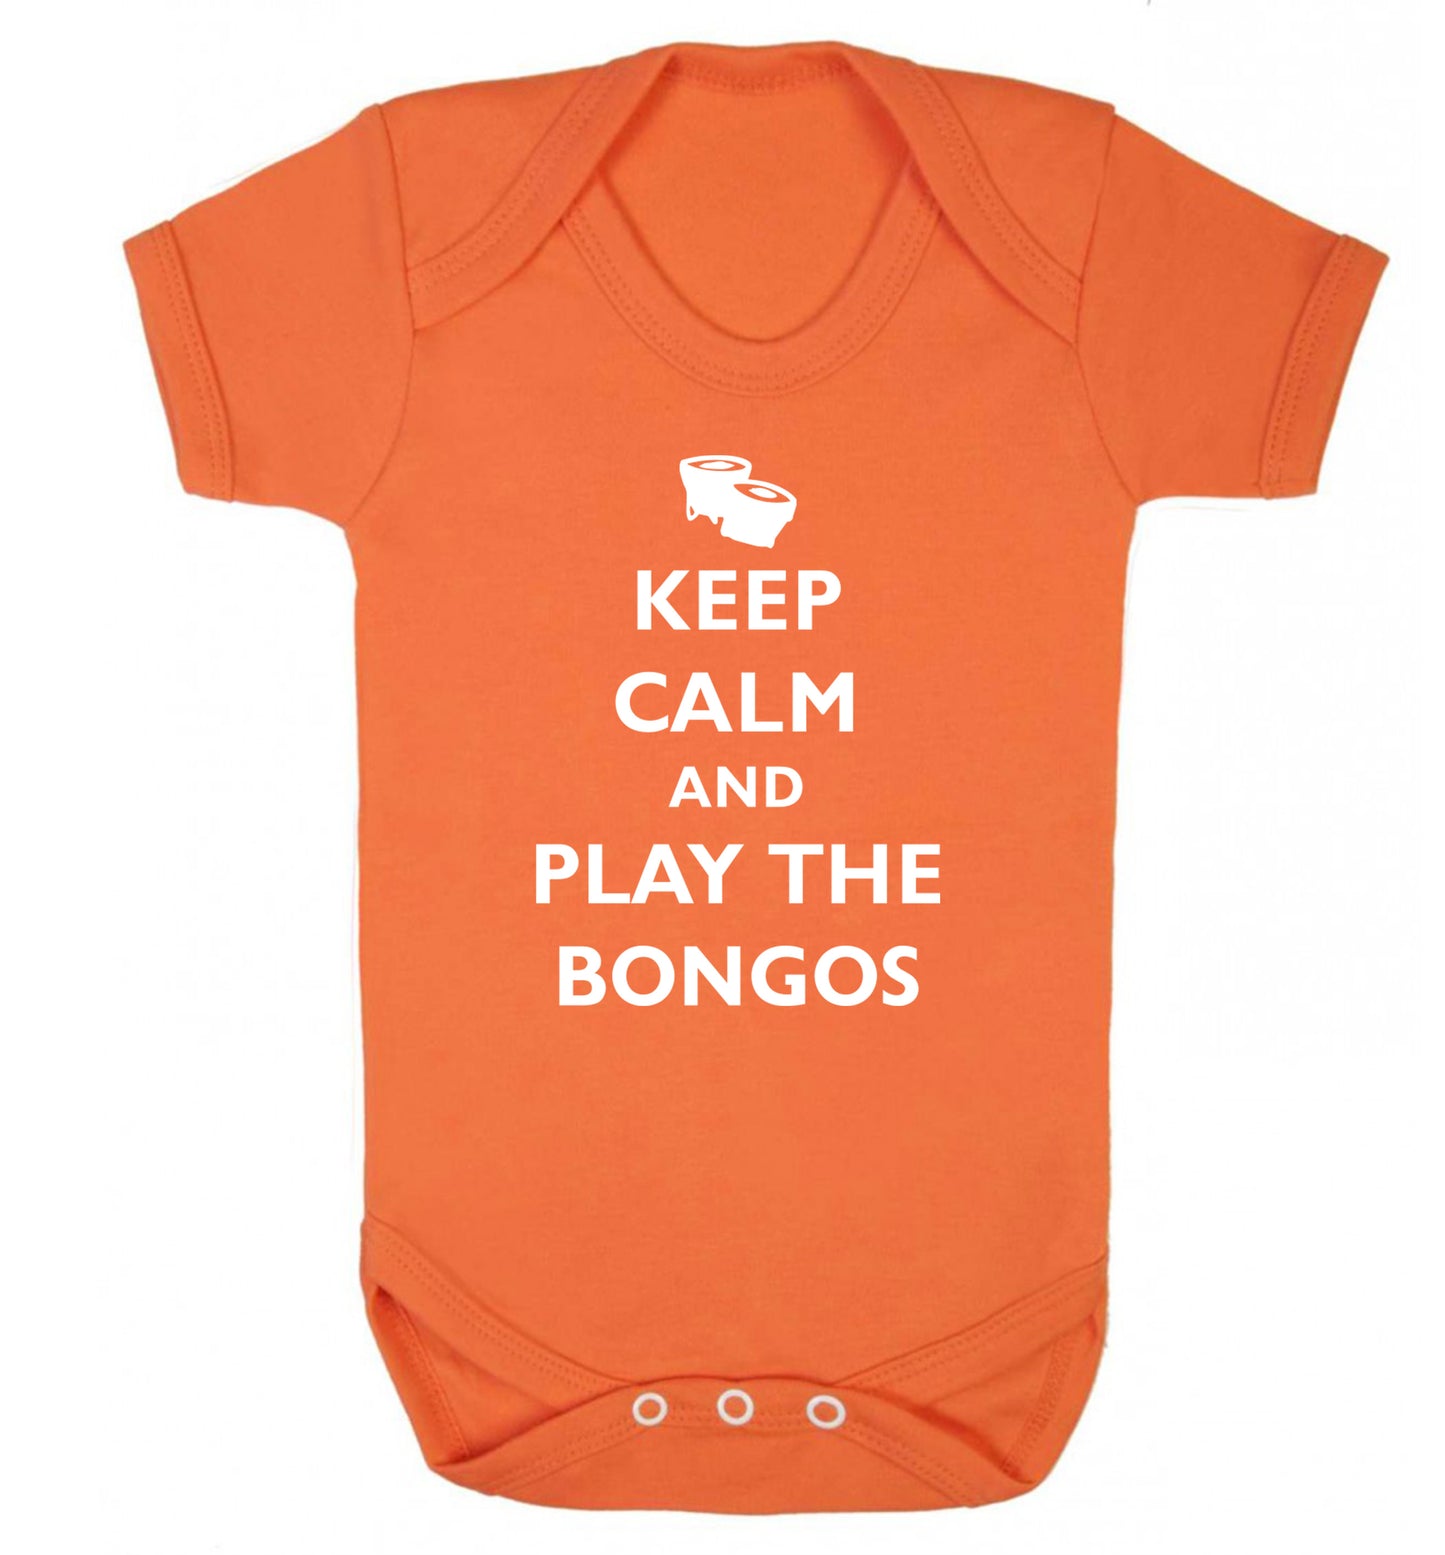 Keep calm and play the bongos Baby Vest orange 18-24 months